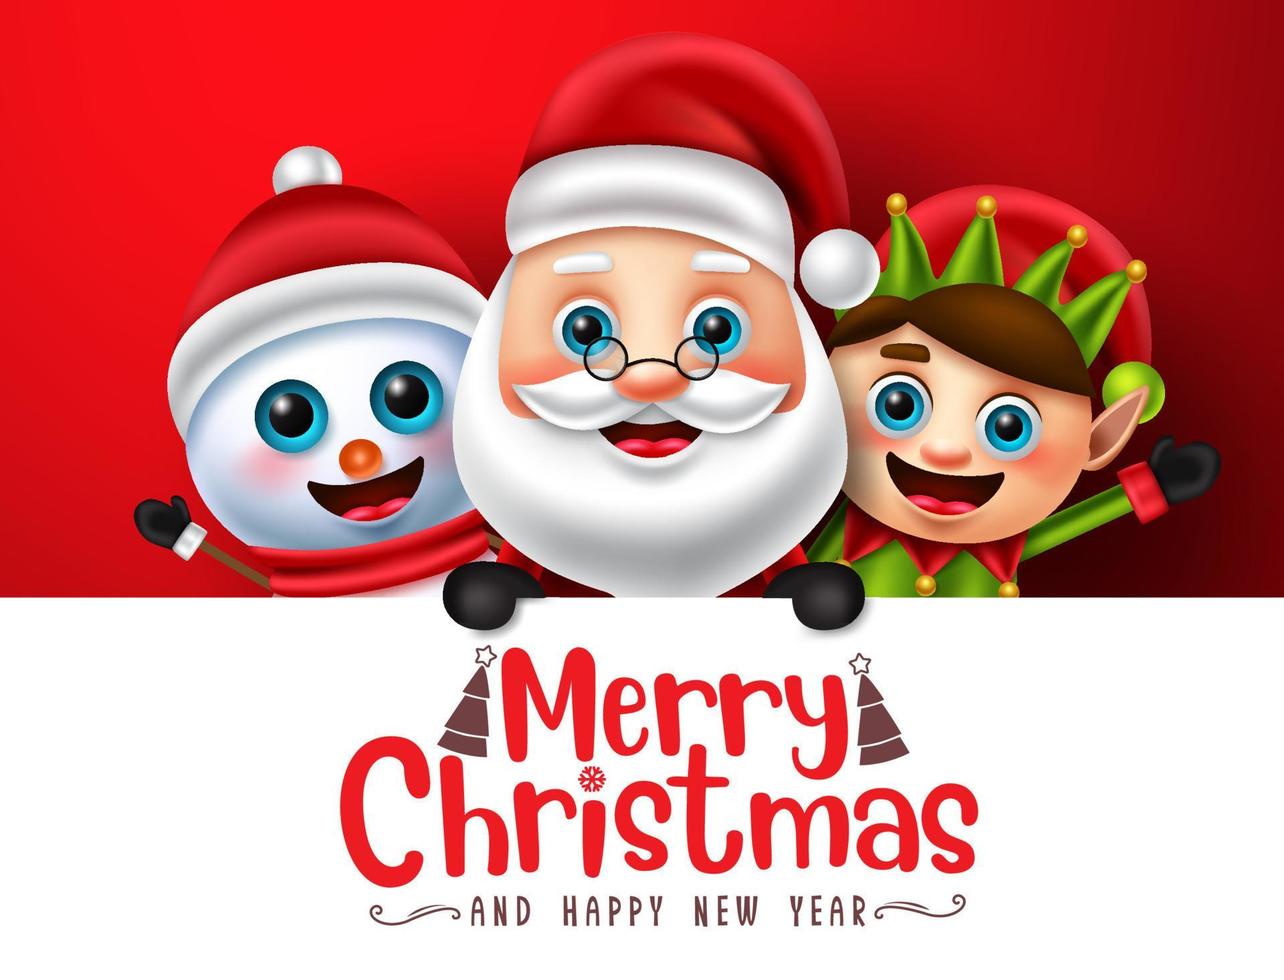 Christmas characters vector template design. Merry christmas text in space for messages with santa claus, reindeer and elf character for xmas greeting card. Vector illustration.